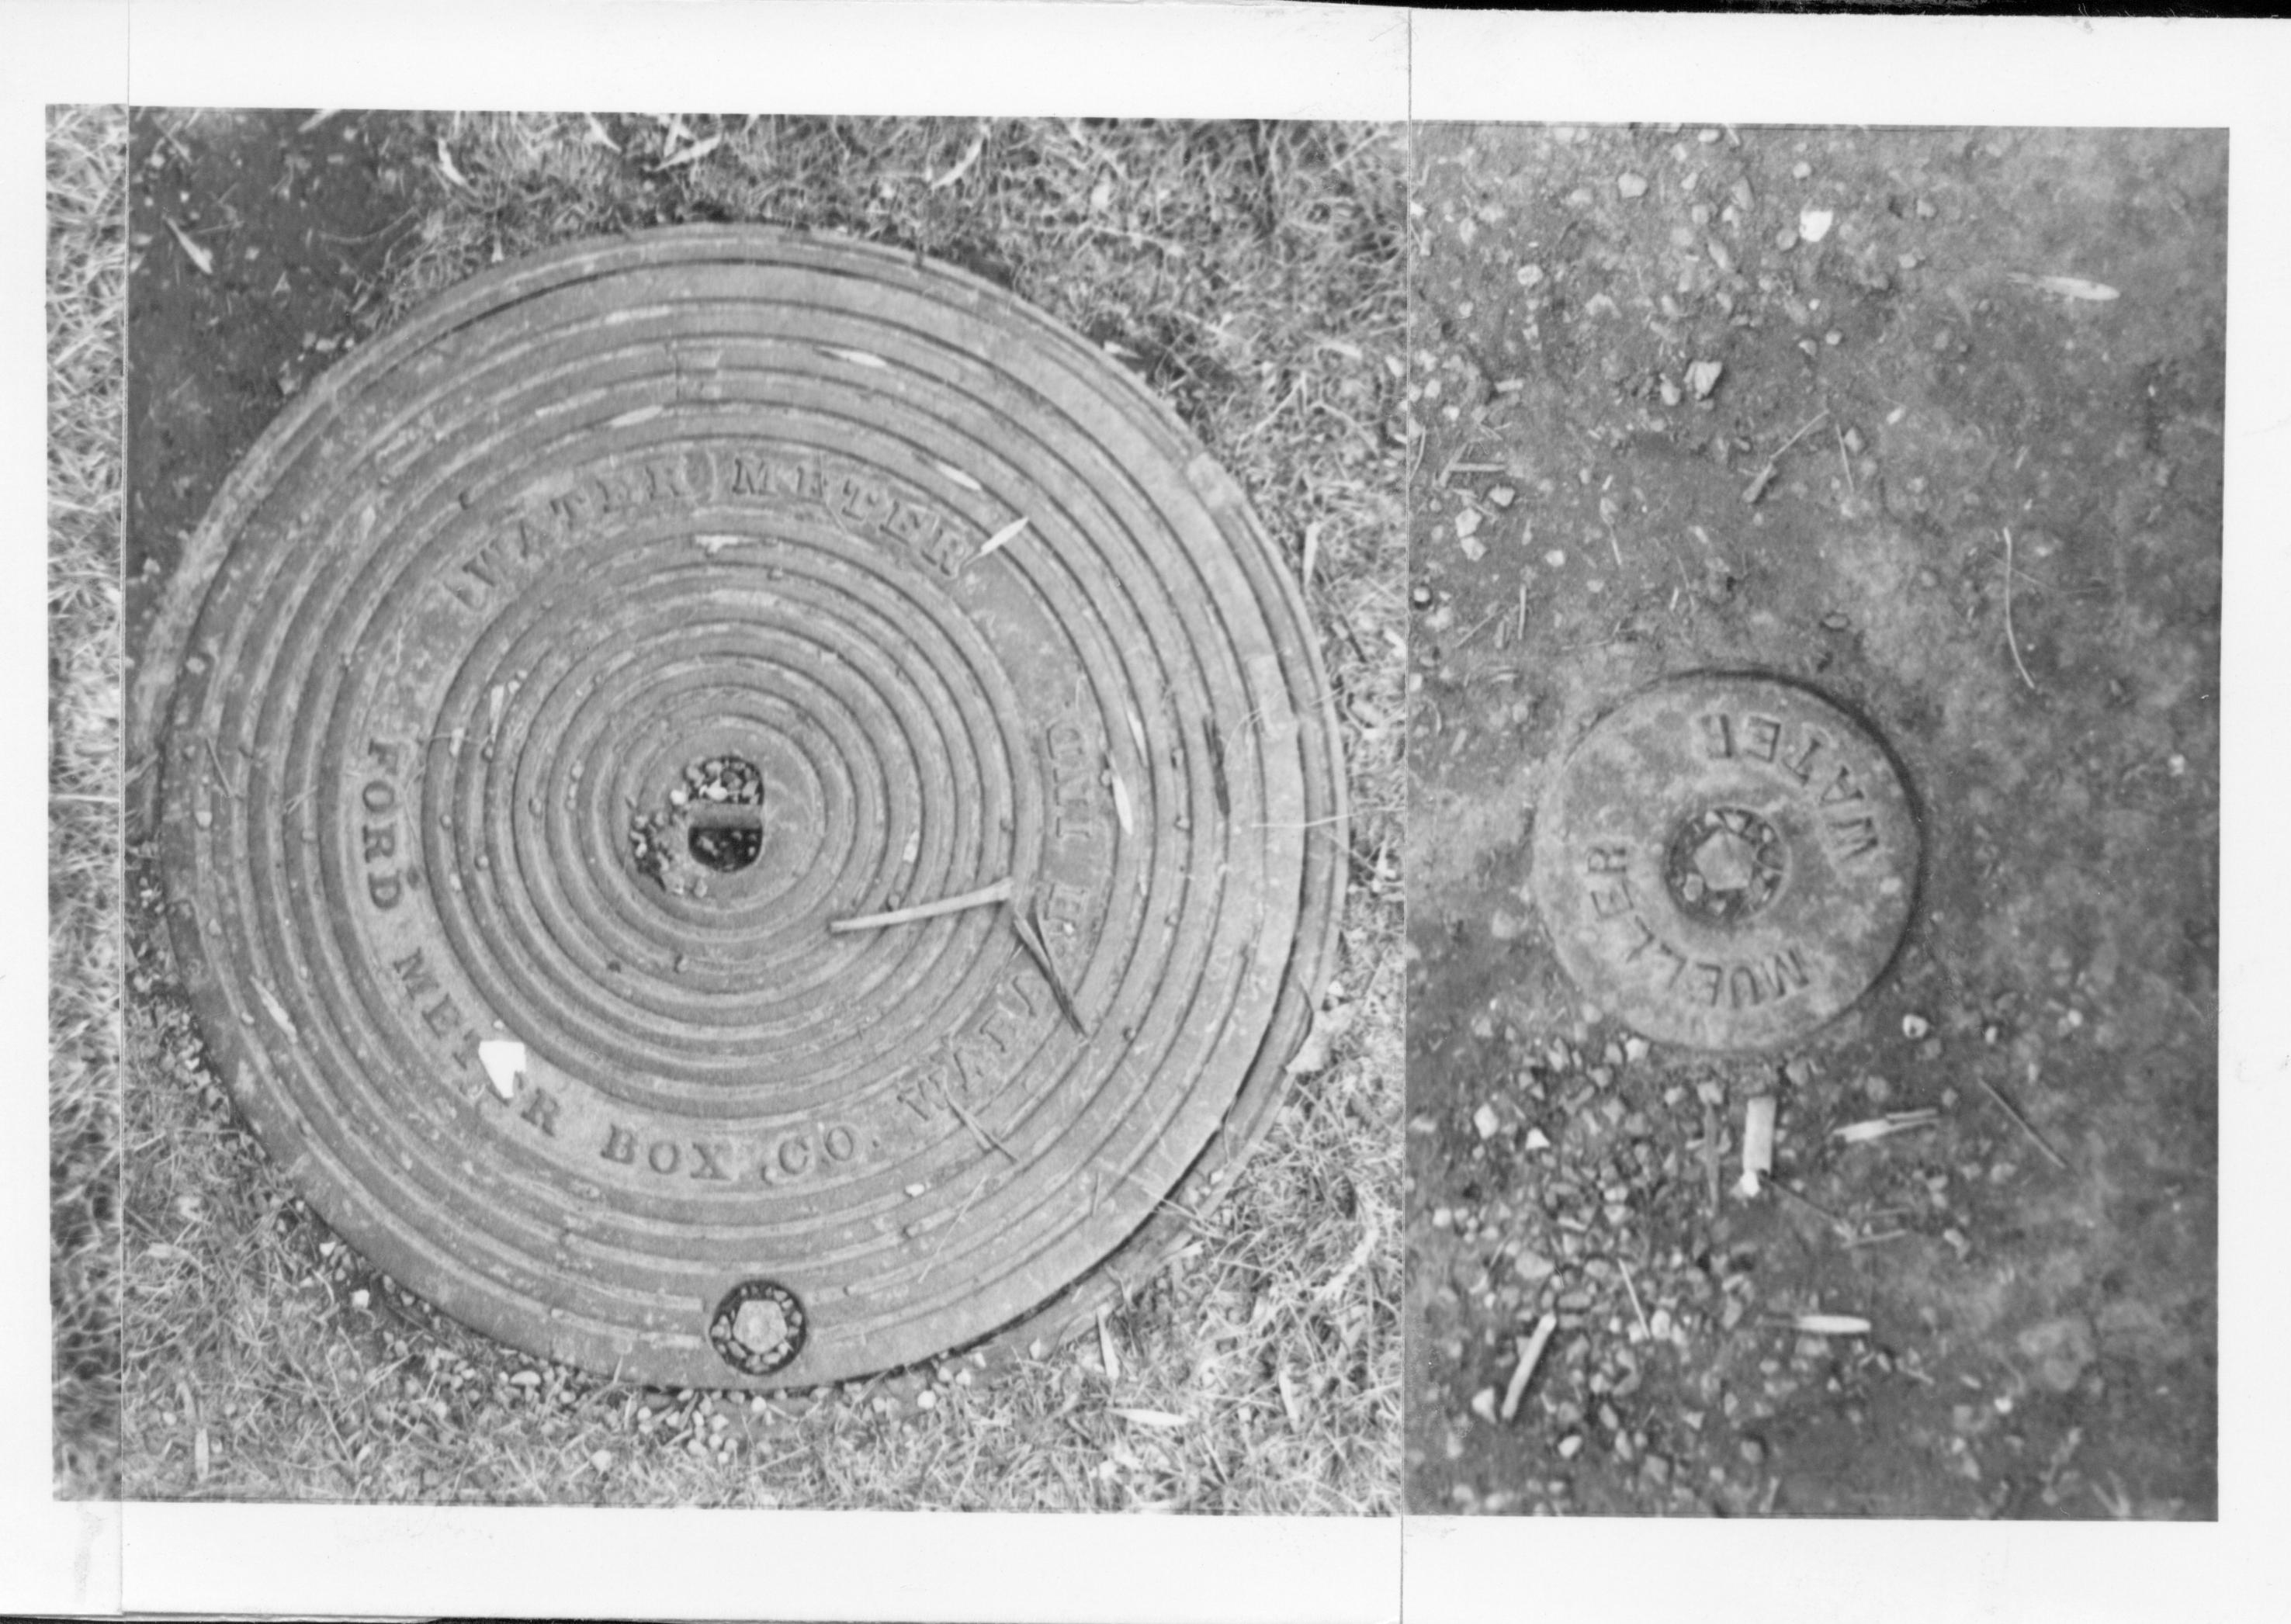 Two water meters for the Lincoln Home. Photo is a composite of 61979 and 61977. These were most likely on the north side of the Lincoln Home and were probably removed during the 1987-1988 restoration. They no longer exist.